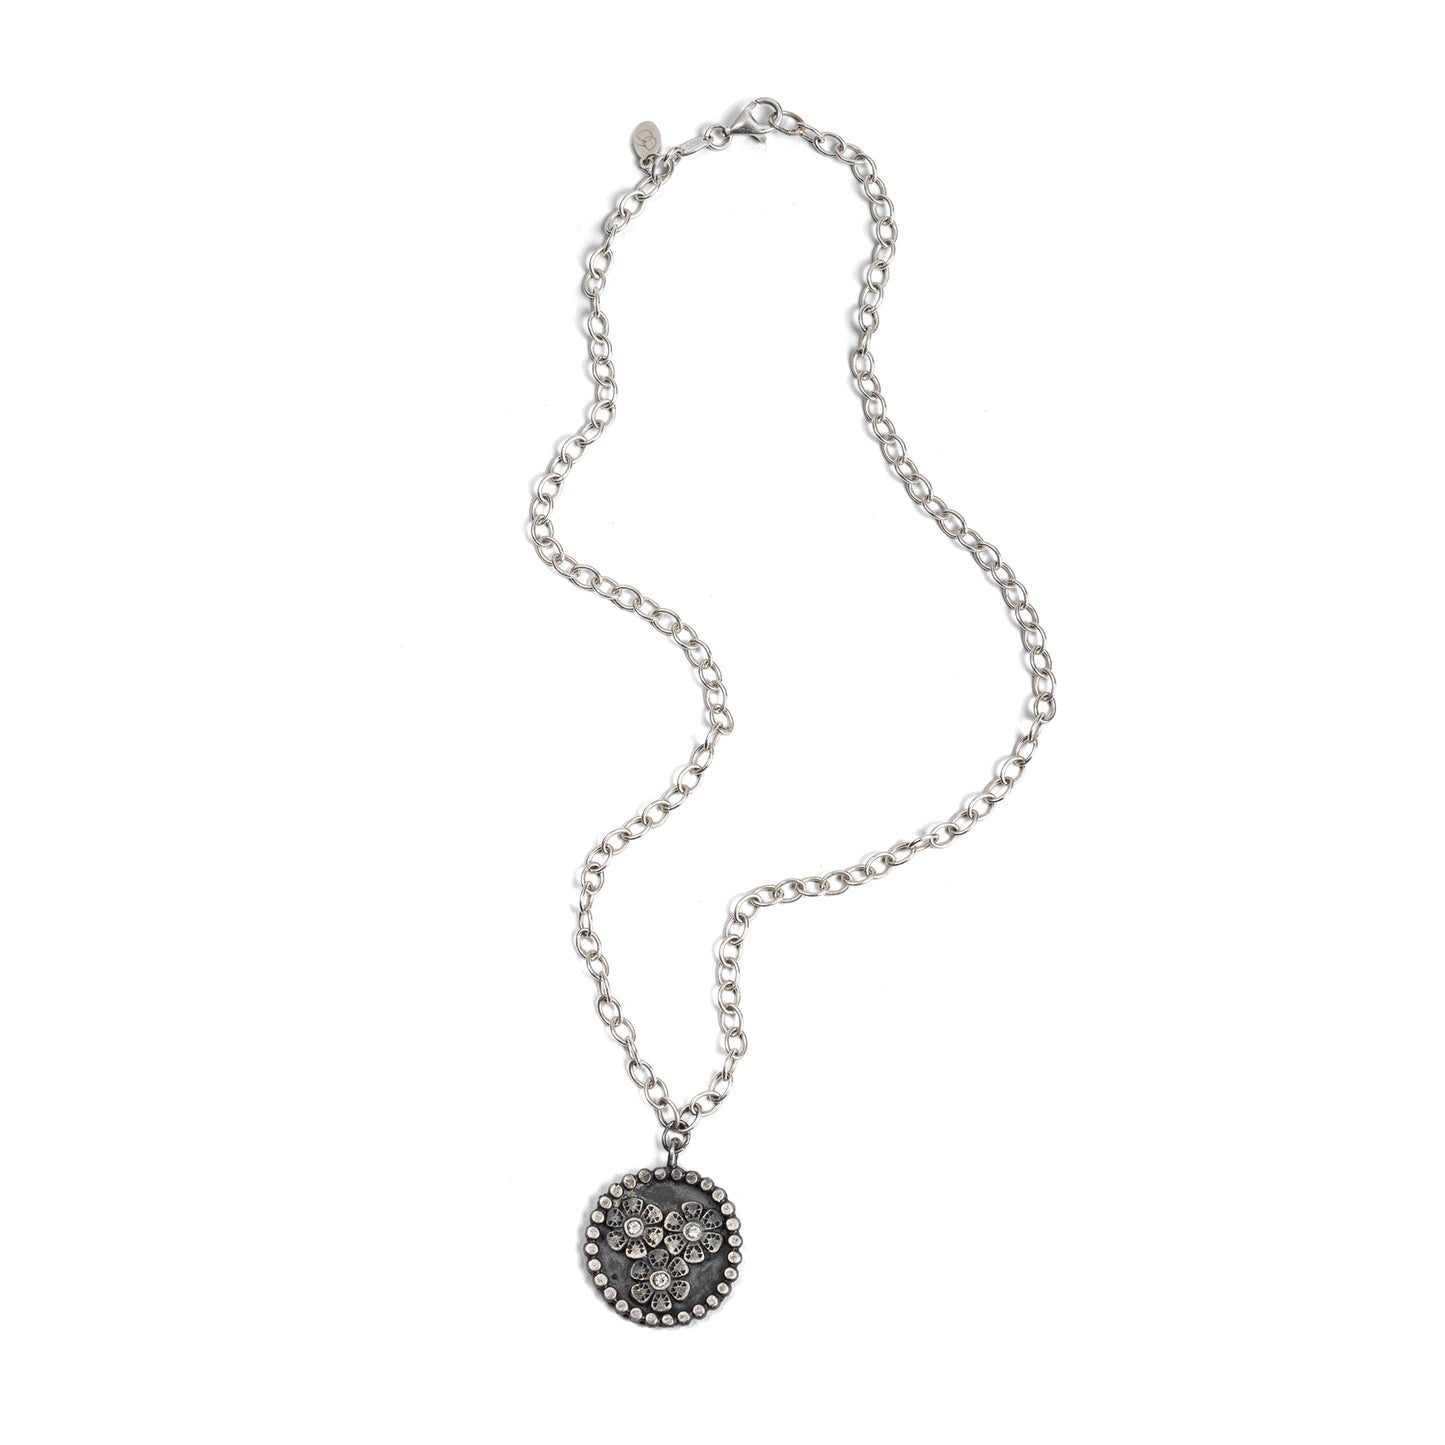 The Sunflower Medallion Necklace